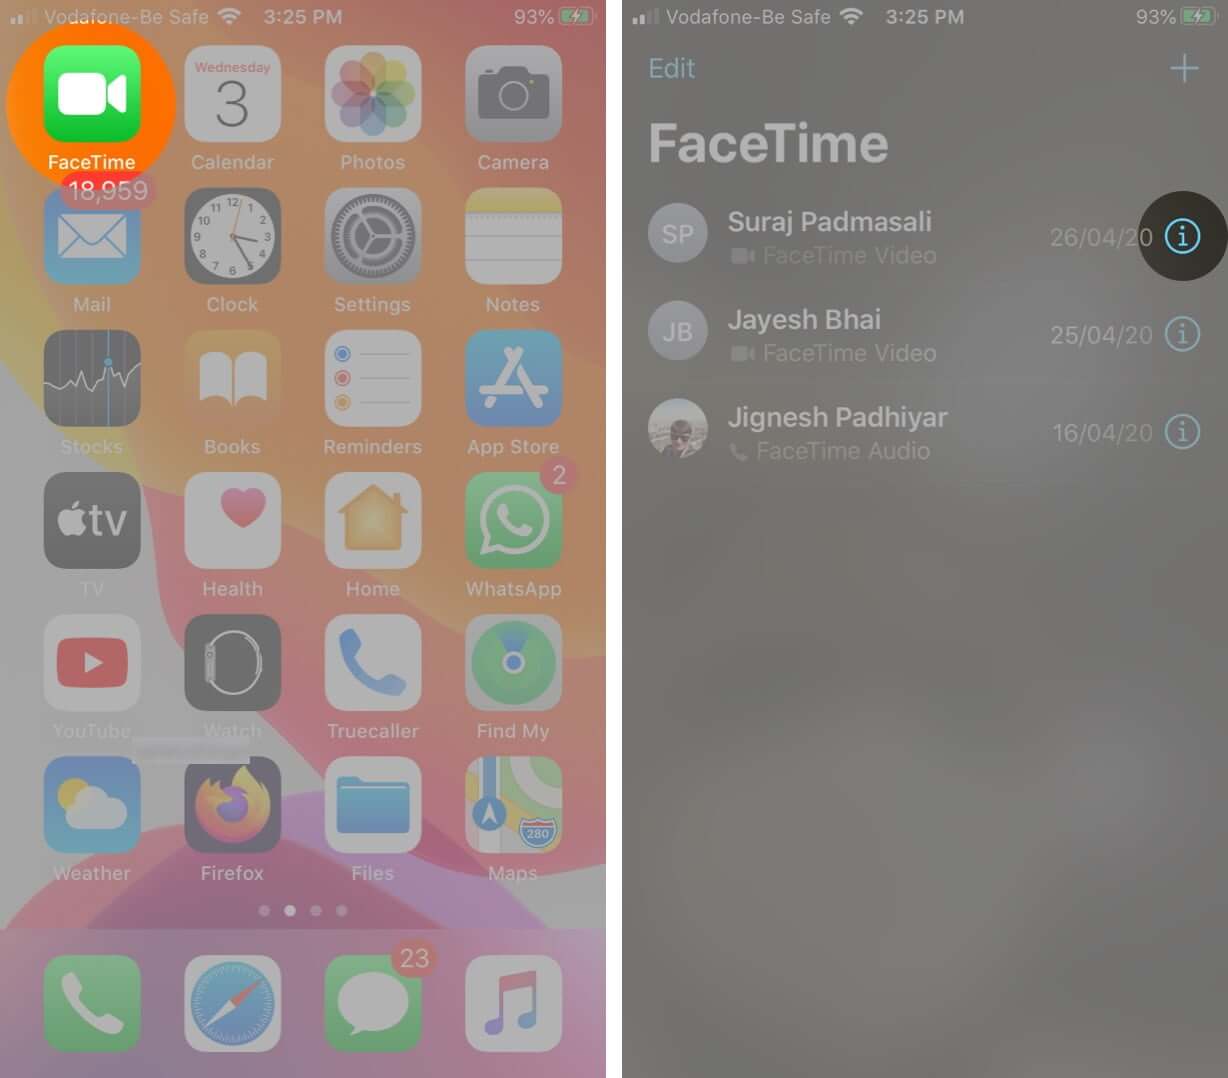 Open FaceTime App and Tap on i icon Next to Contact Name